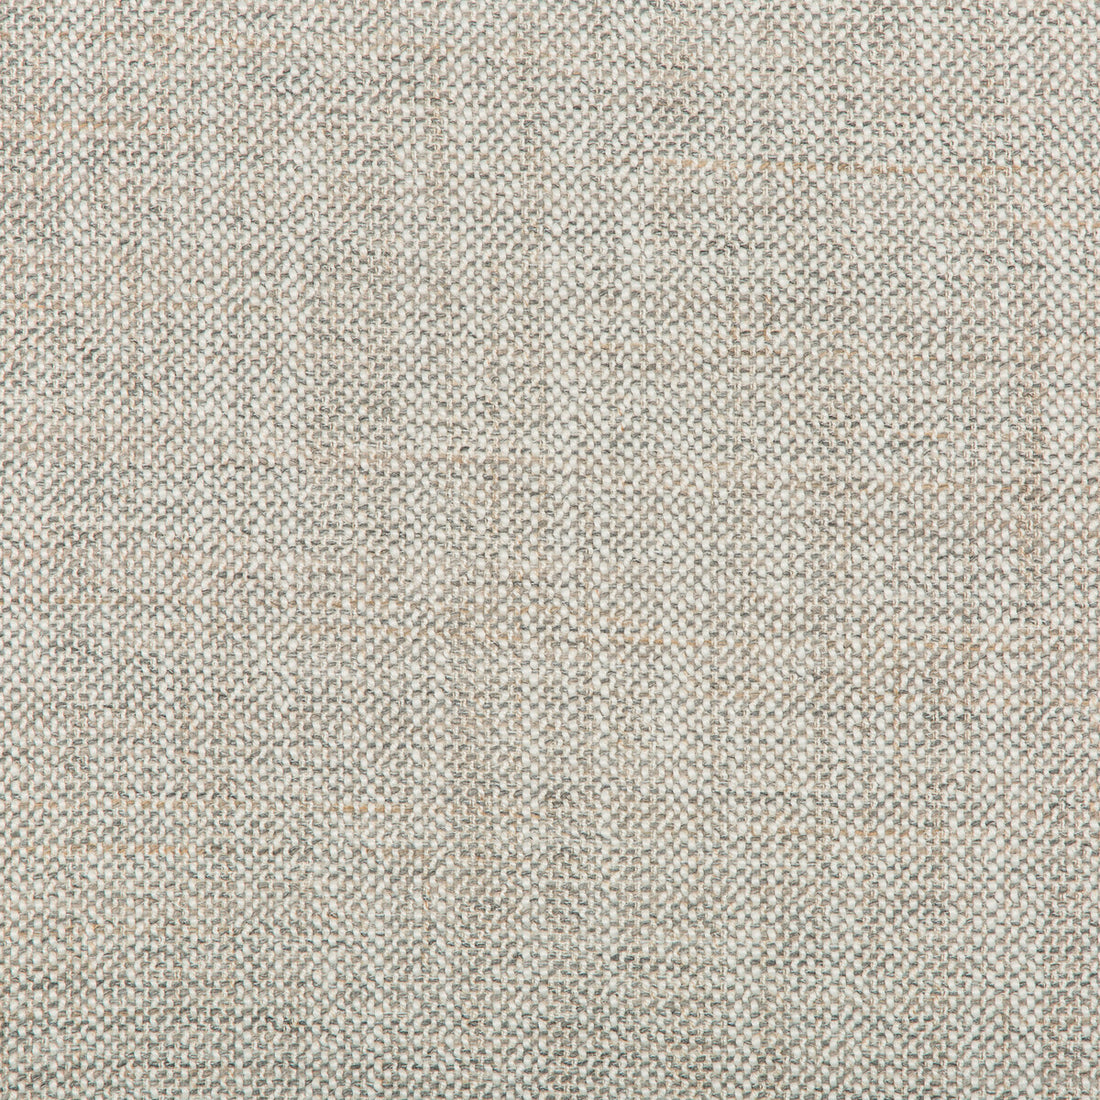 Kravet Couture fabric in 36635-11 color - pattern 36635.11.0 - by Kravet Couture in the Mabley Handler collection